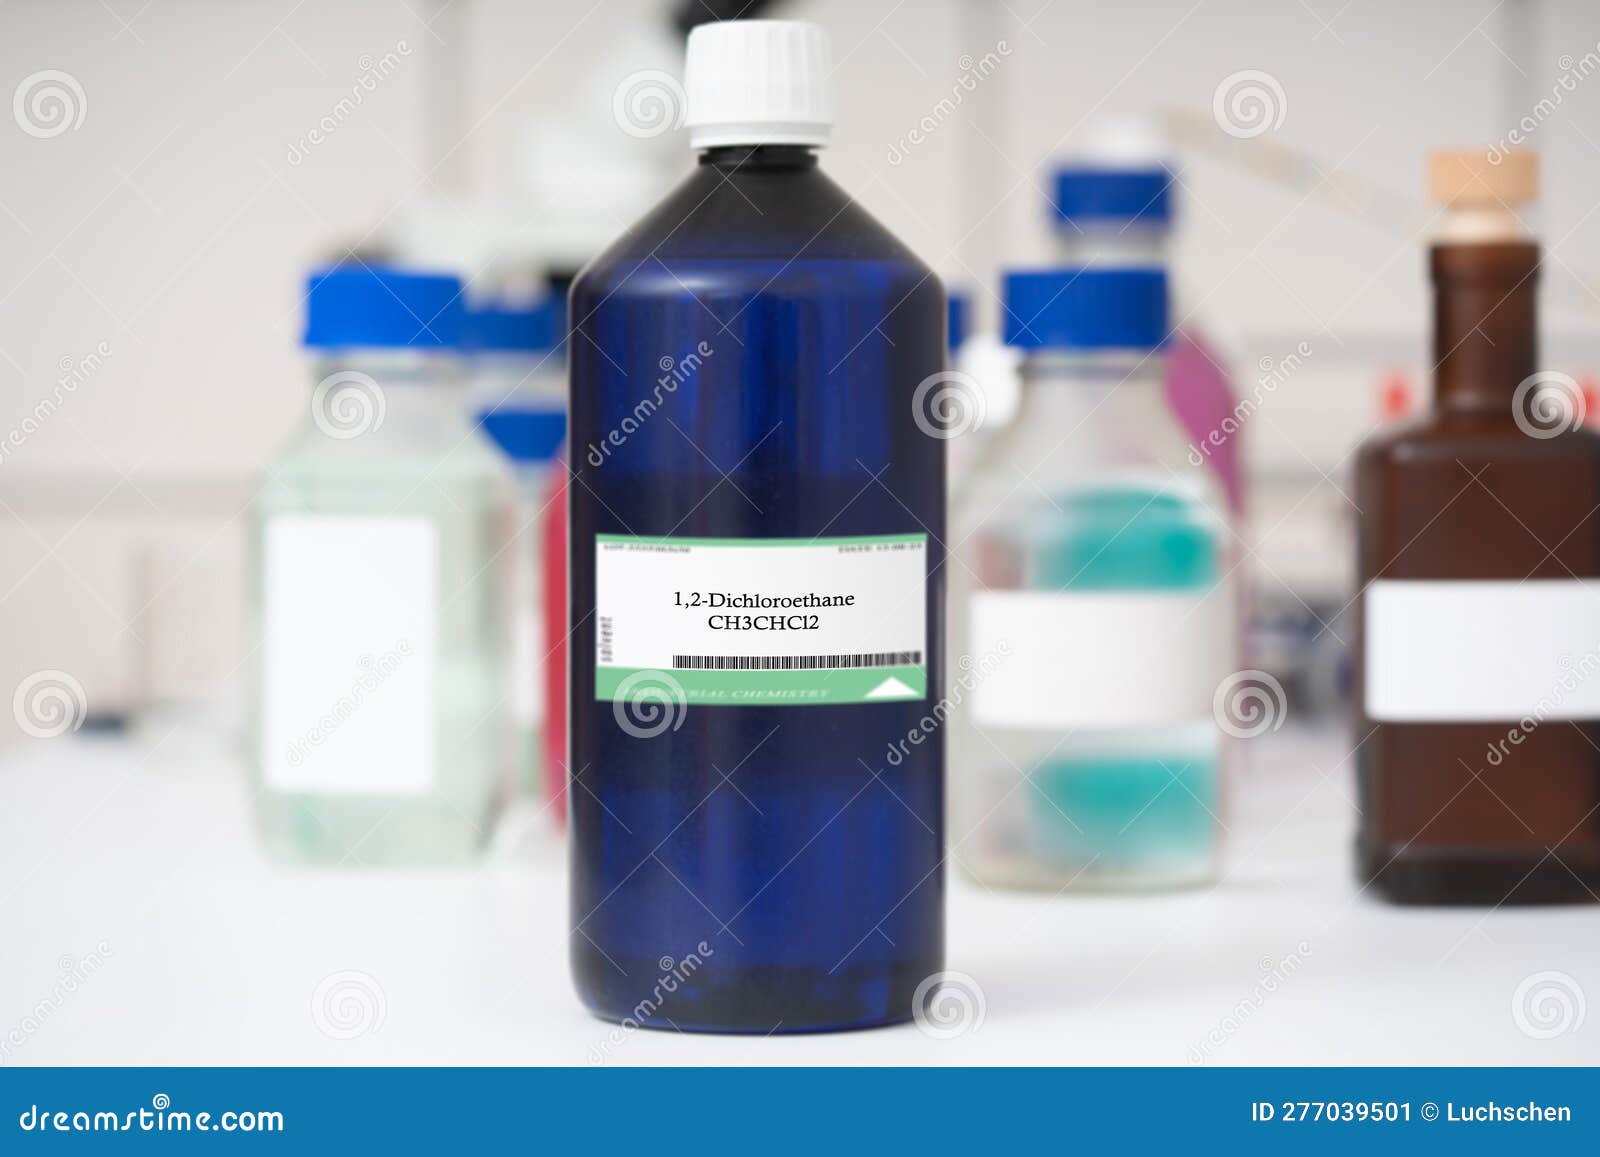 1,2-Dichloroethane CH3CHCl2 Stock Image - Image of chemistry, colorless ...